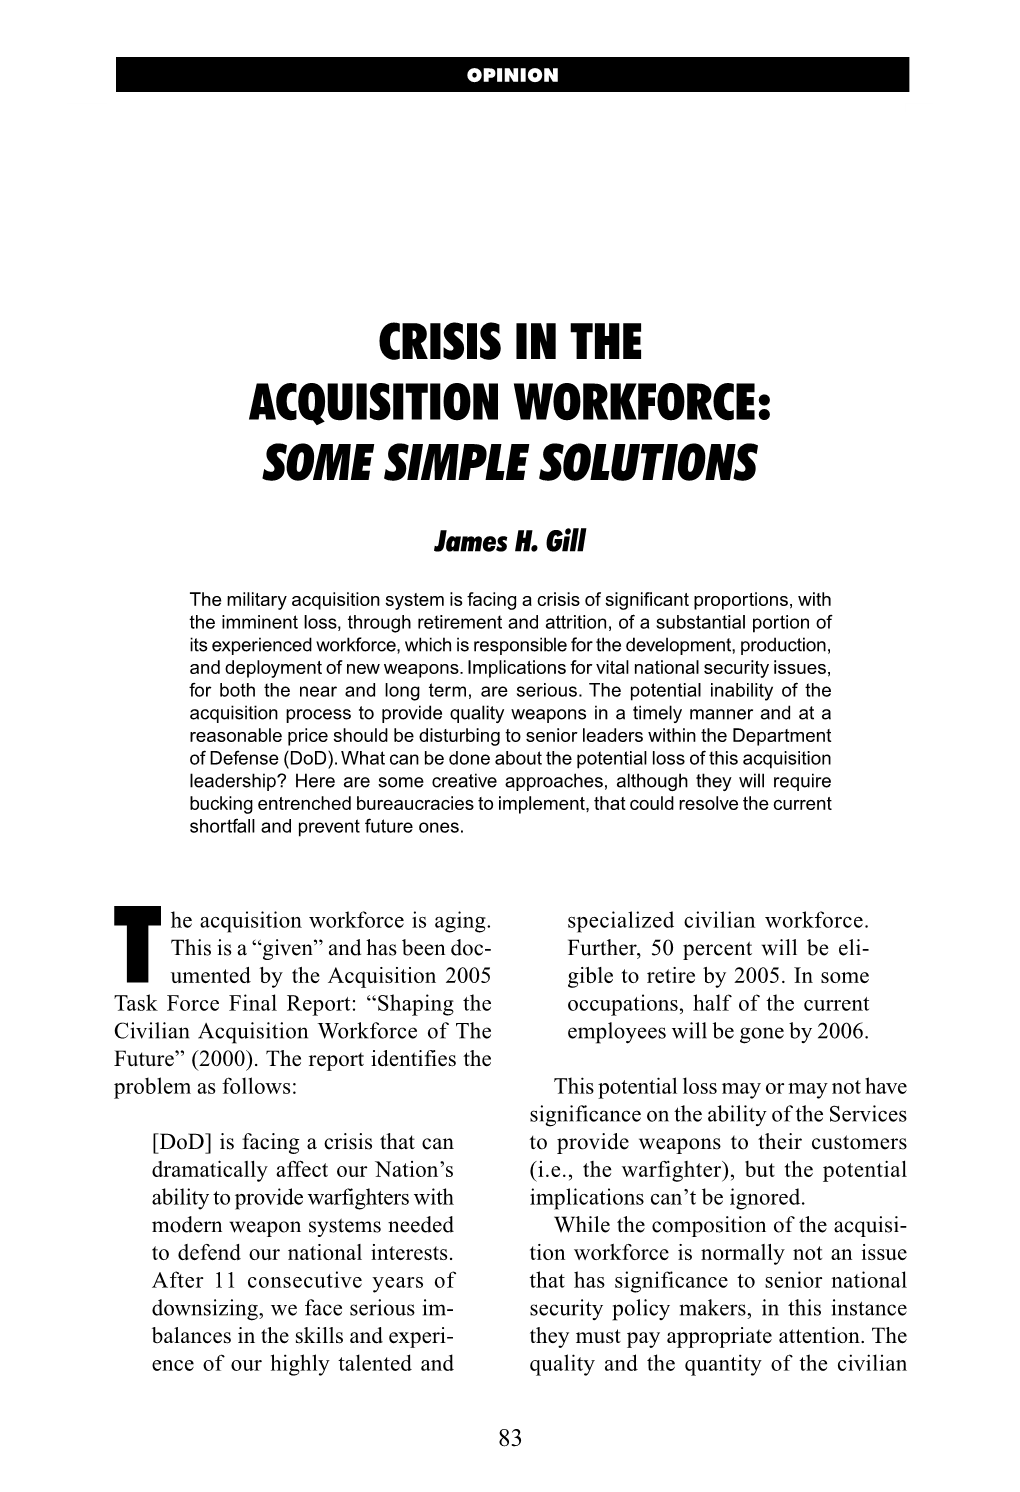 Crisis in the Acquisition Workforce: Some Simple Solutions